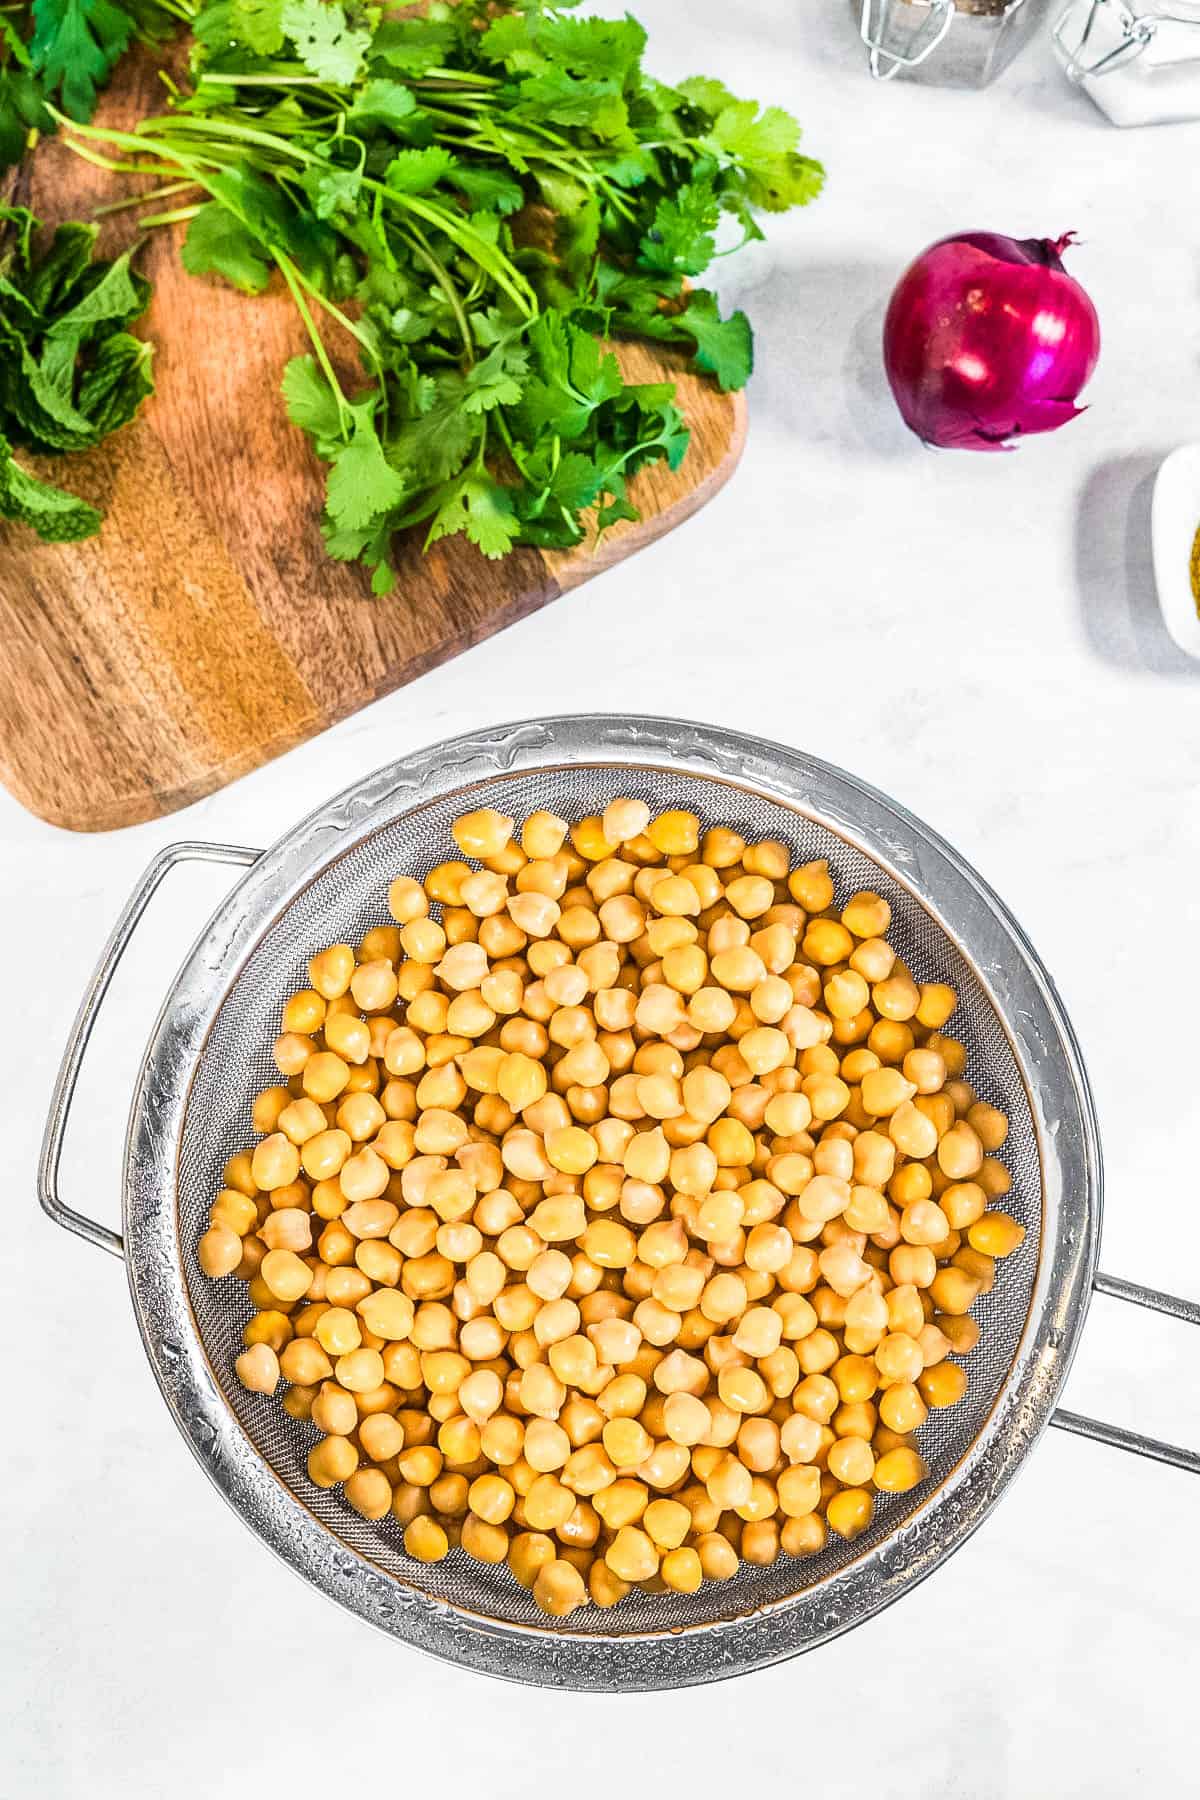 Chickpeas cooked in an air fryer with other ingredients to make falafel.